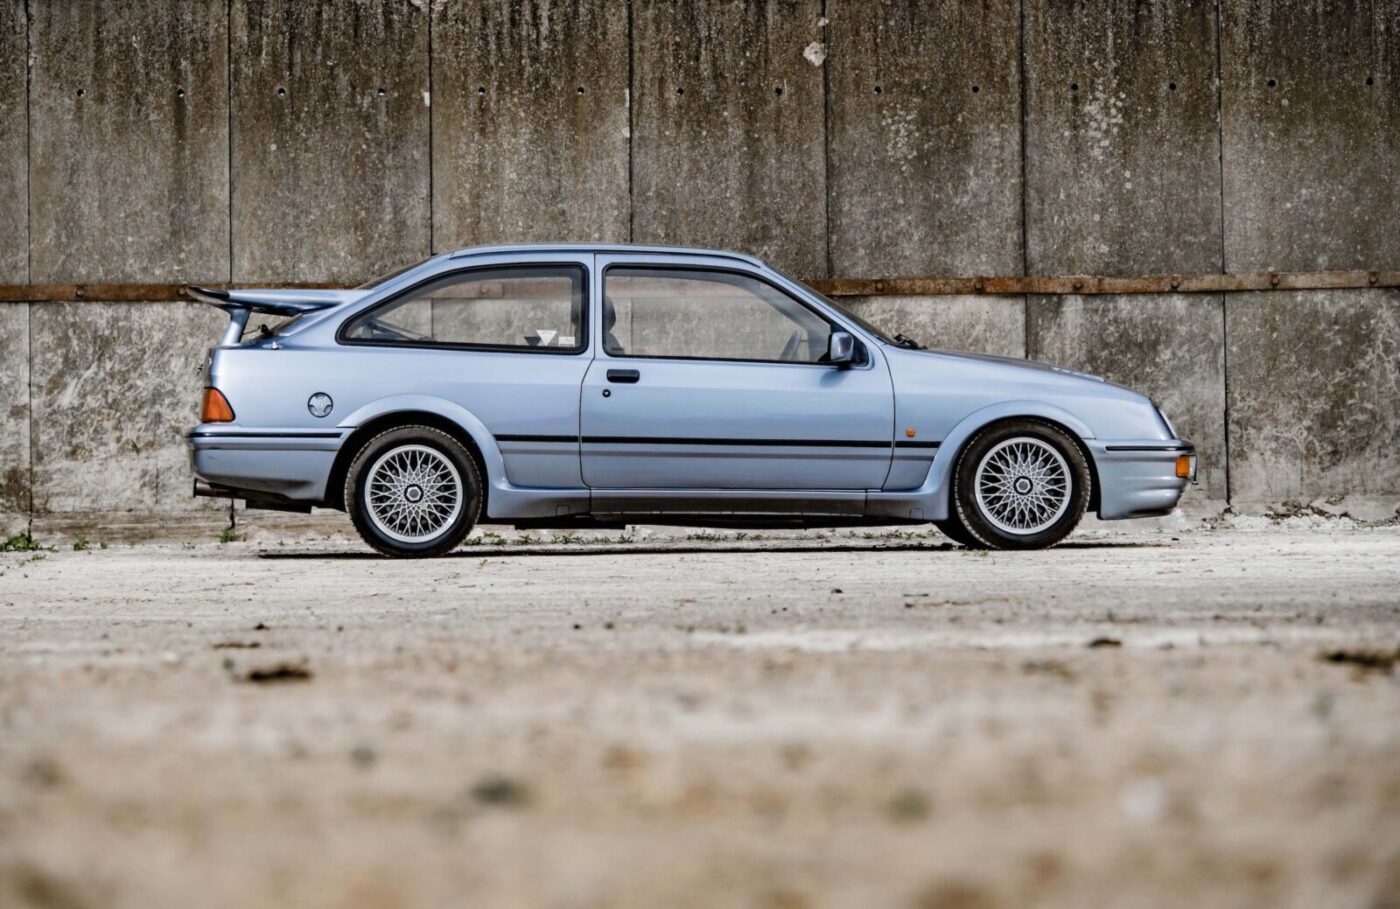 Ford Sierra RS Cosworth three-door